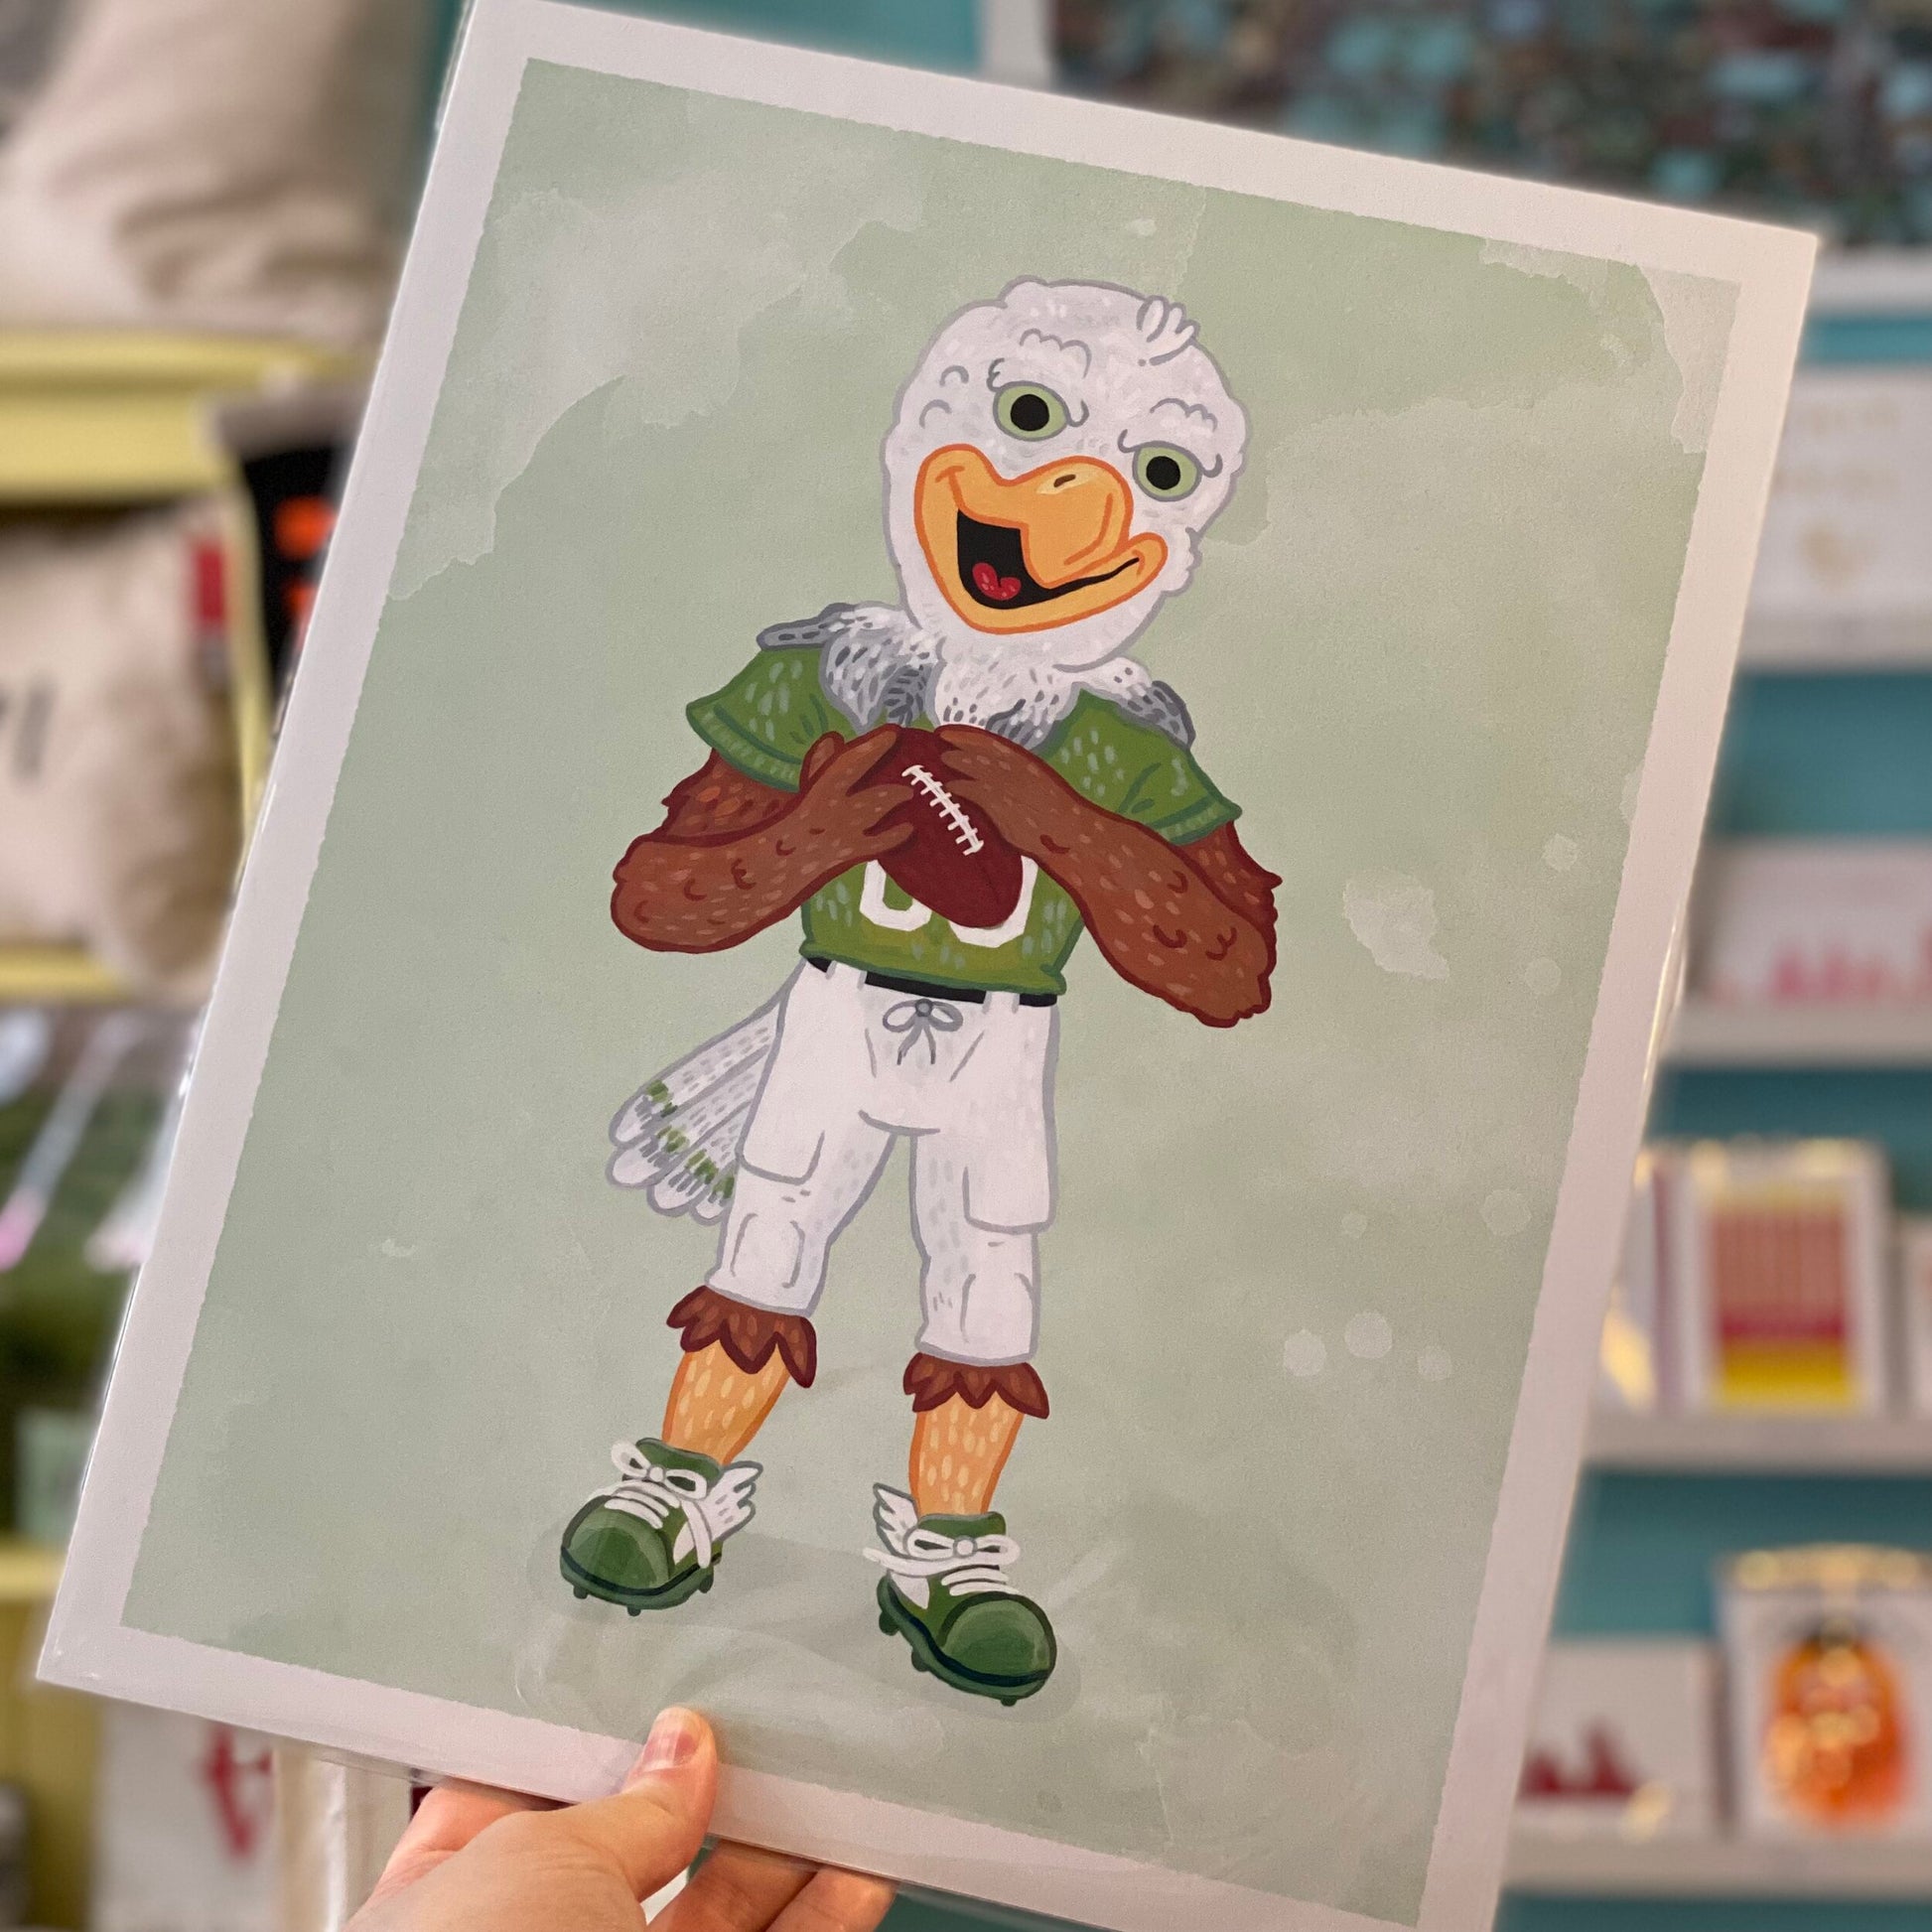 An illustration of Philly Mascot Prints, an anthropomorphic bird dressed in football attire and holding a football, displayed on an archival digital print held by Jamie Bendas.